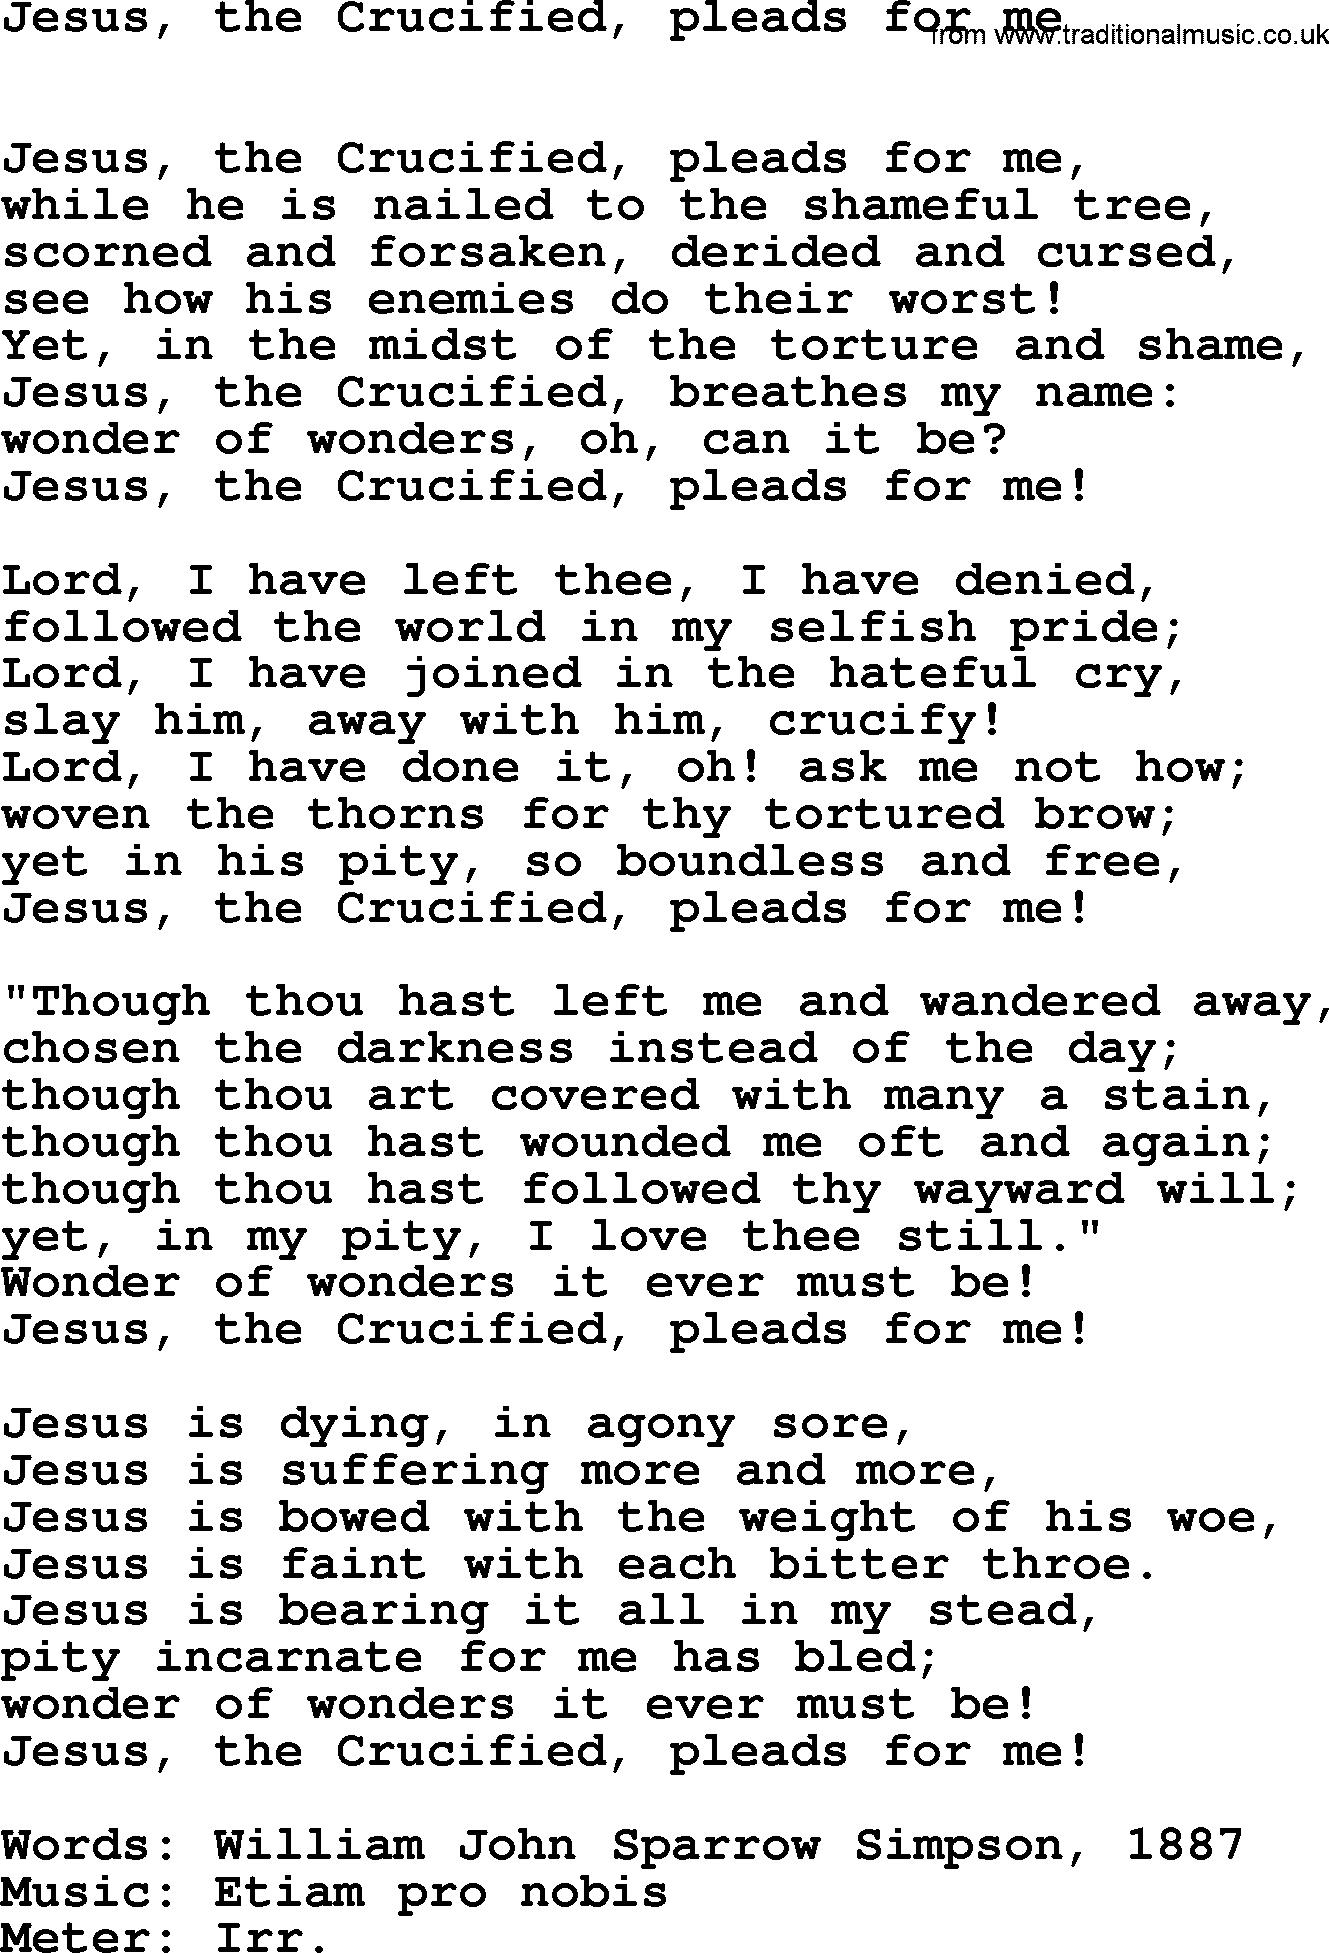 Book of Common Praise Hymn: Jesus, The Crucified, Pleads For Me.txt lyrics with midi music